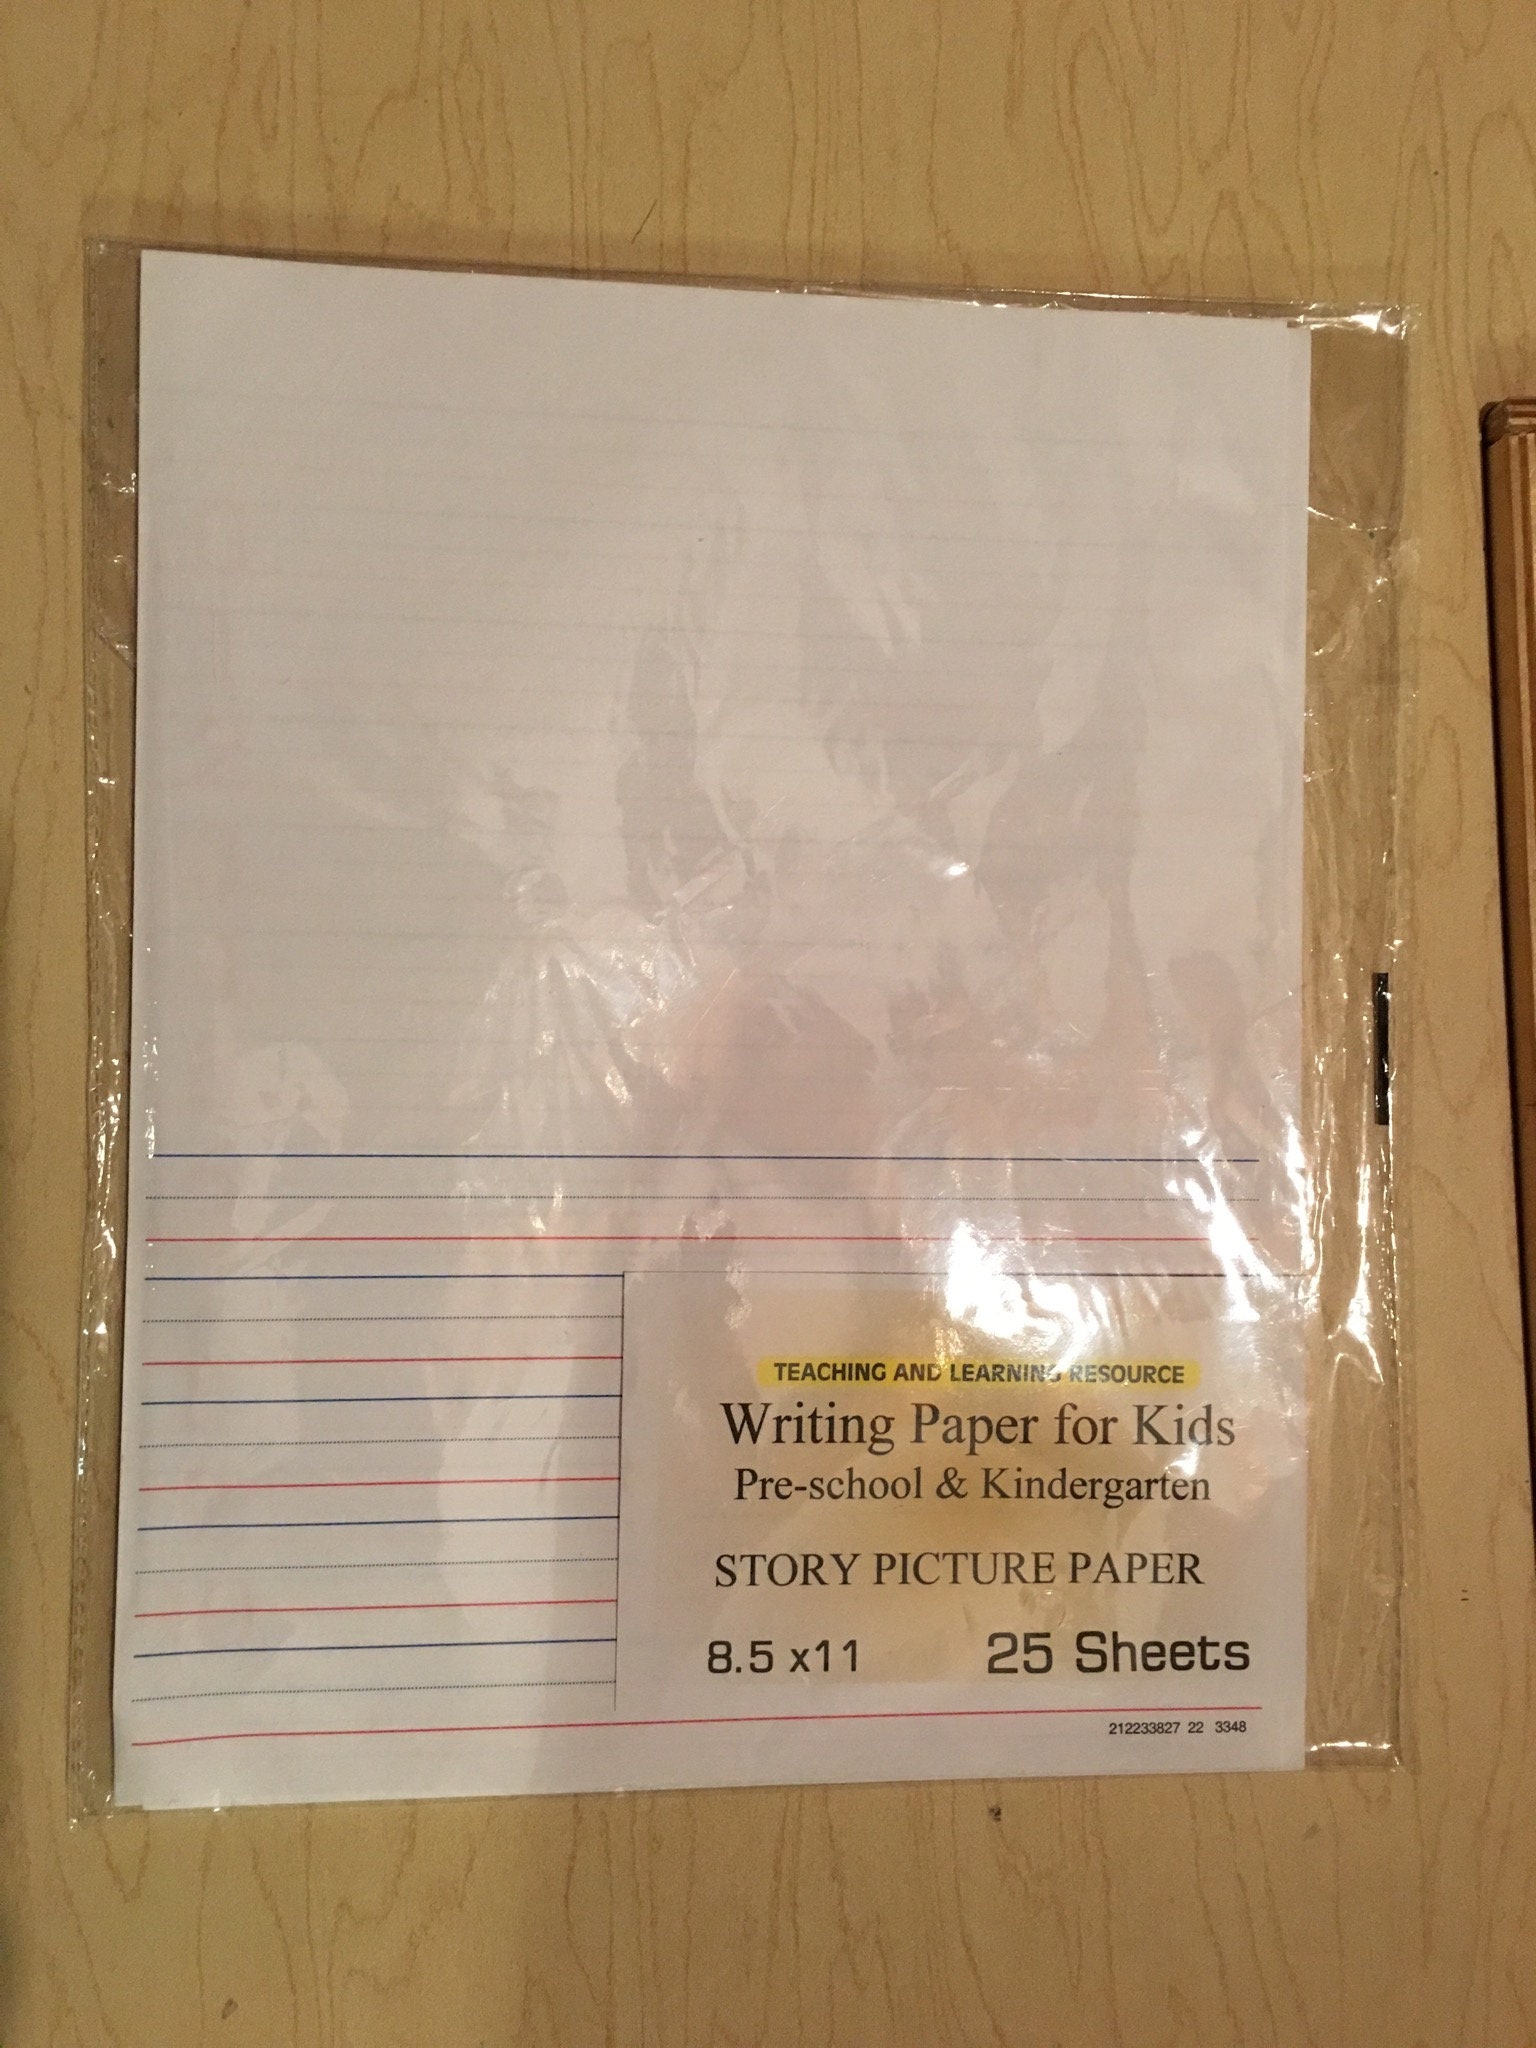 Writing Paper for Kids Story Picture Paper 11 X 8.5 In, 20 Lb, 25 Sheets 